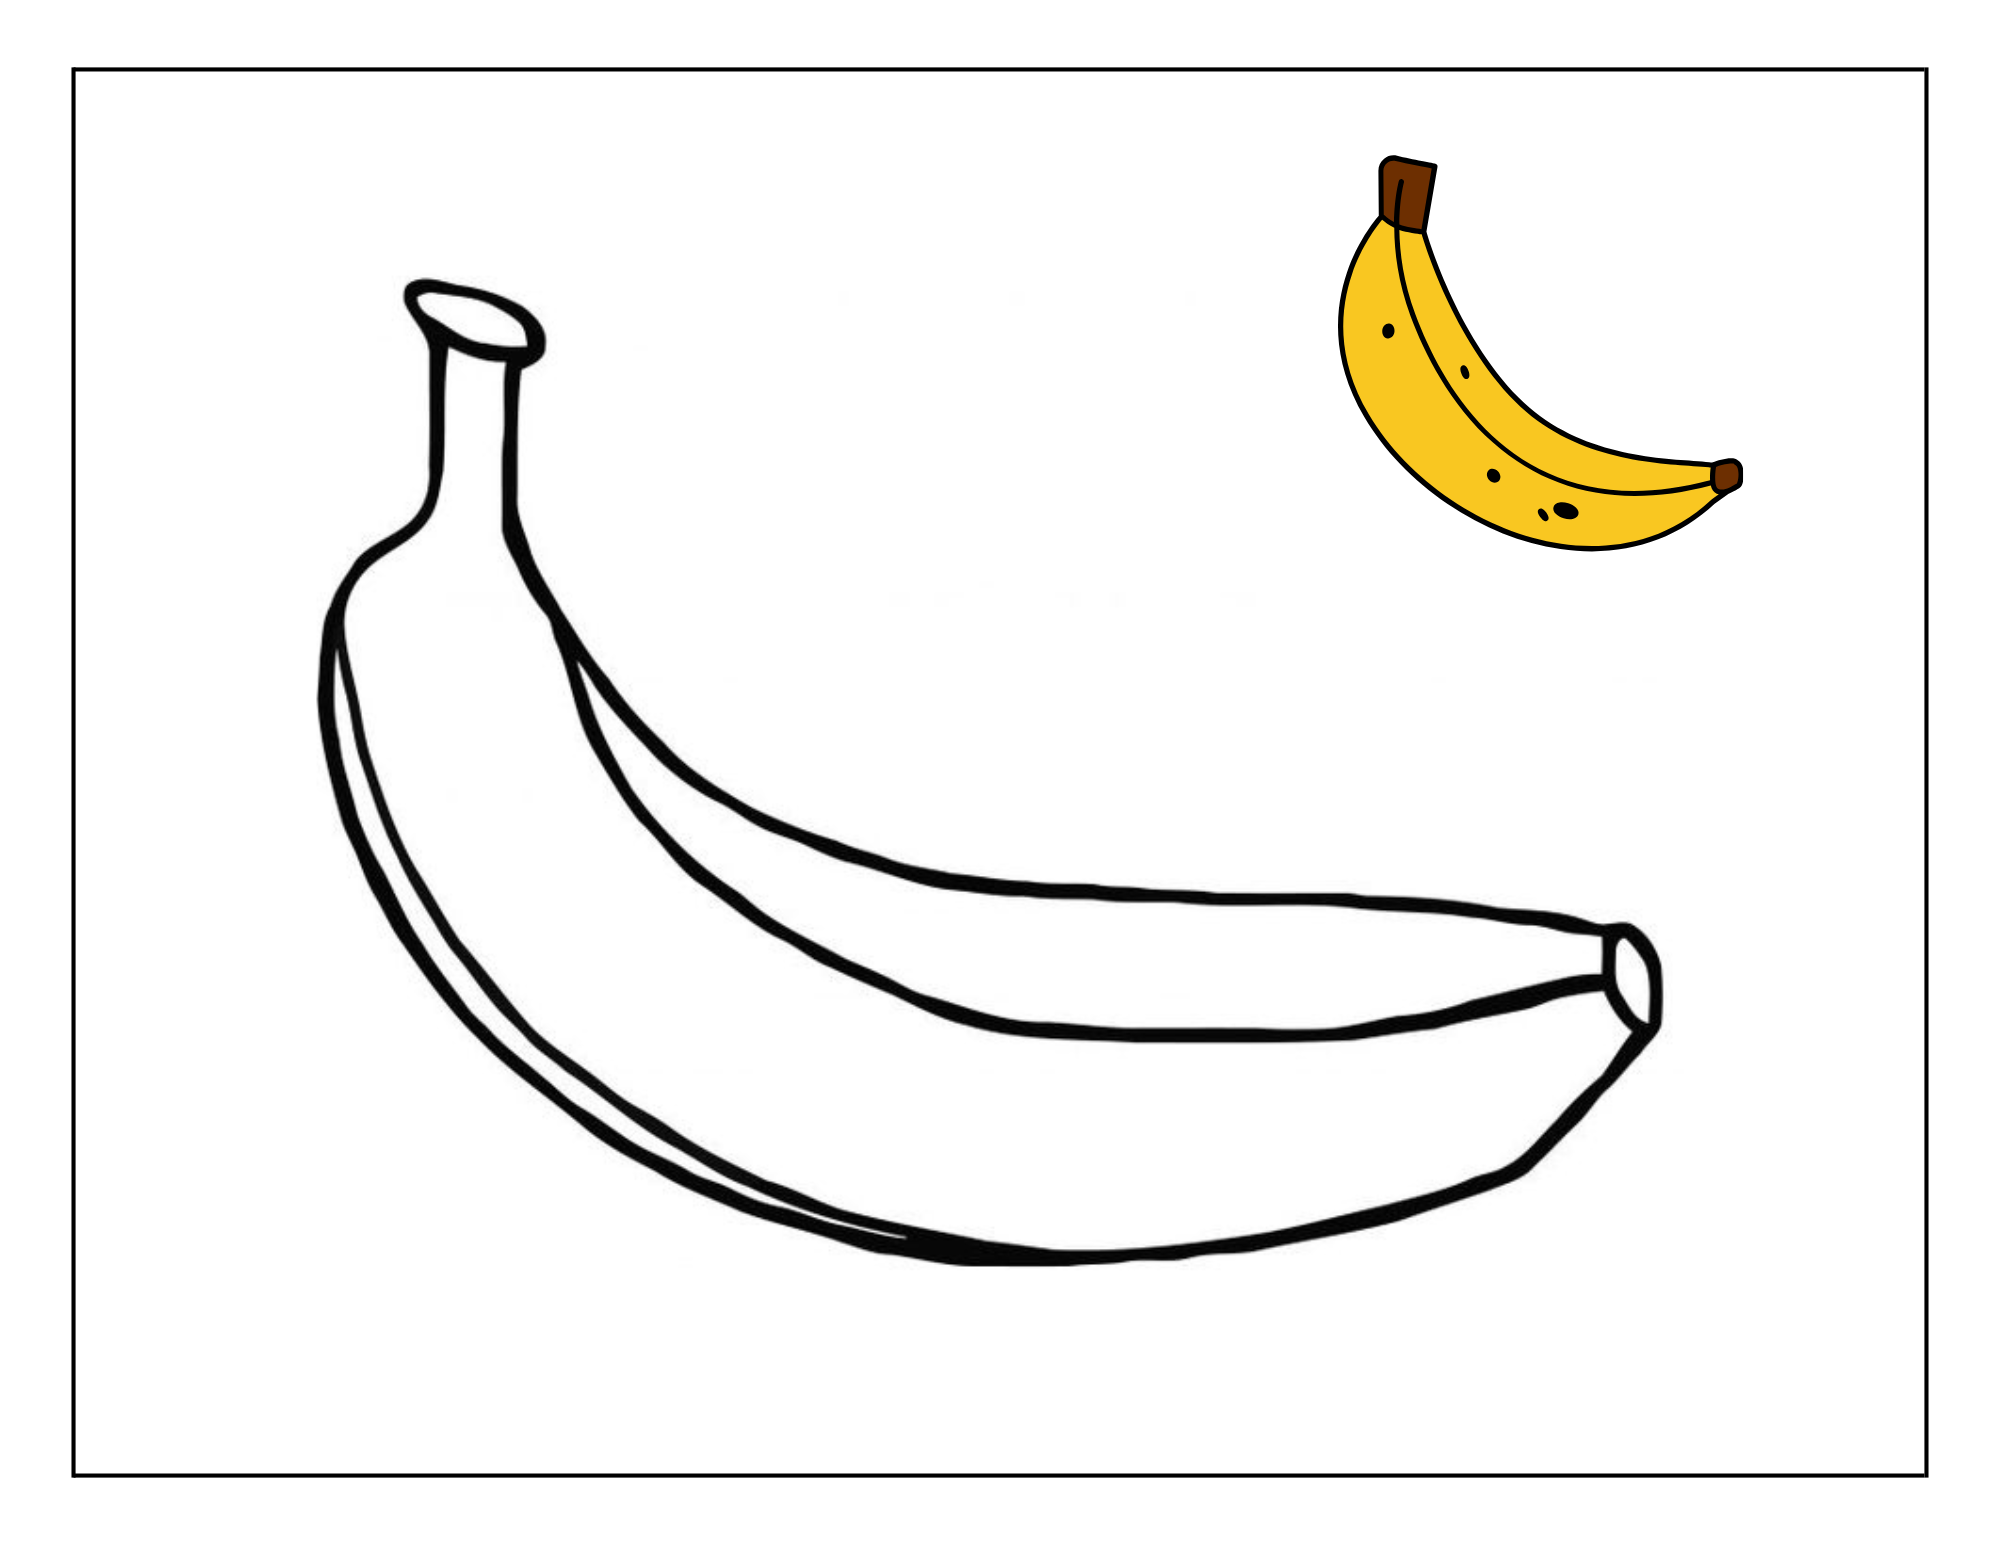 Fruit coloring pages for toddlers - Banana